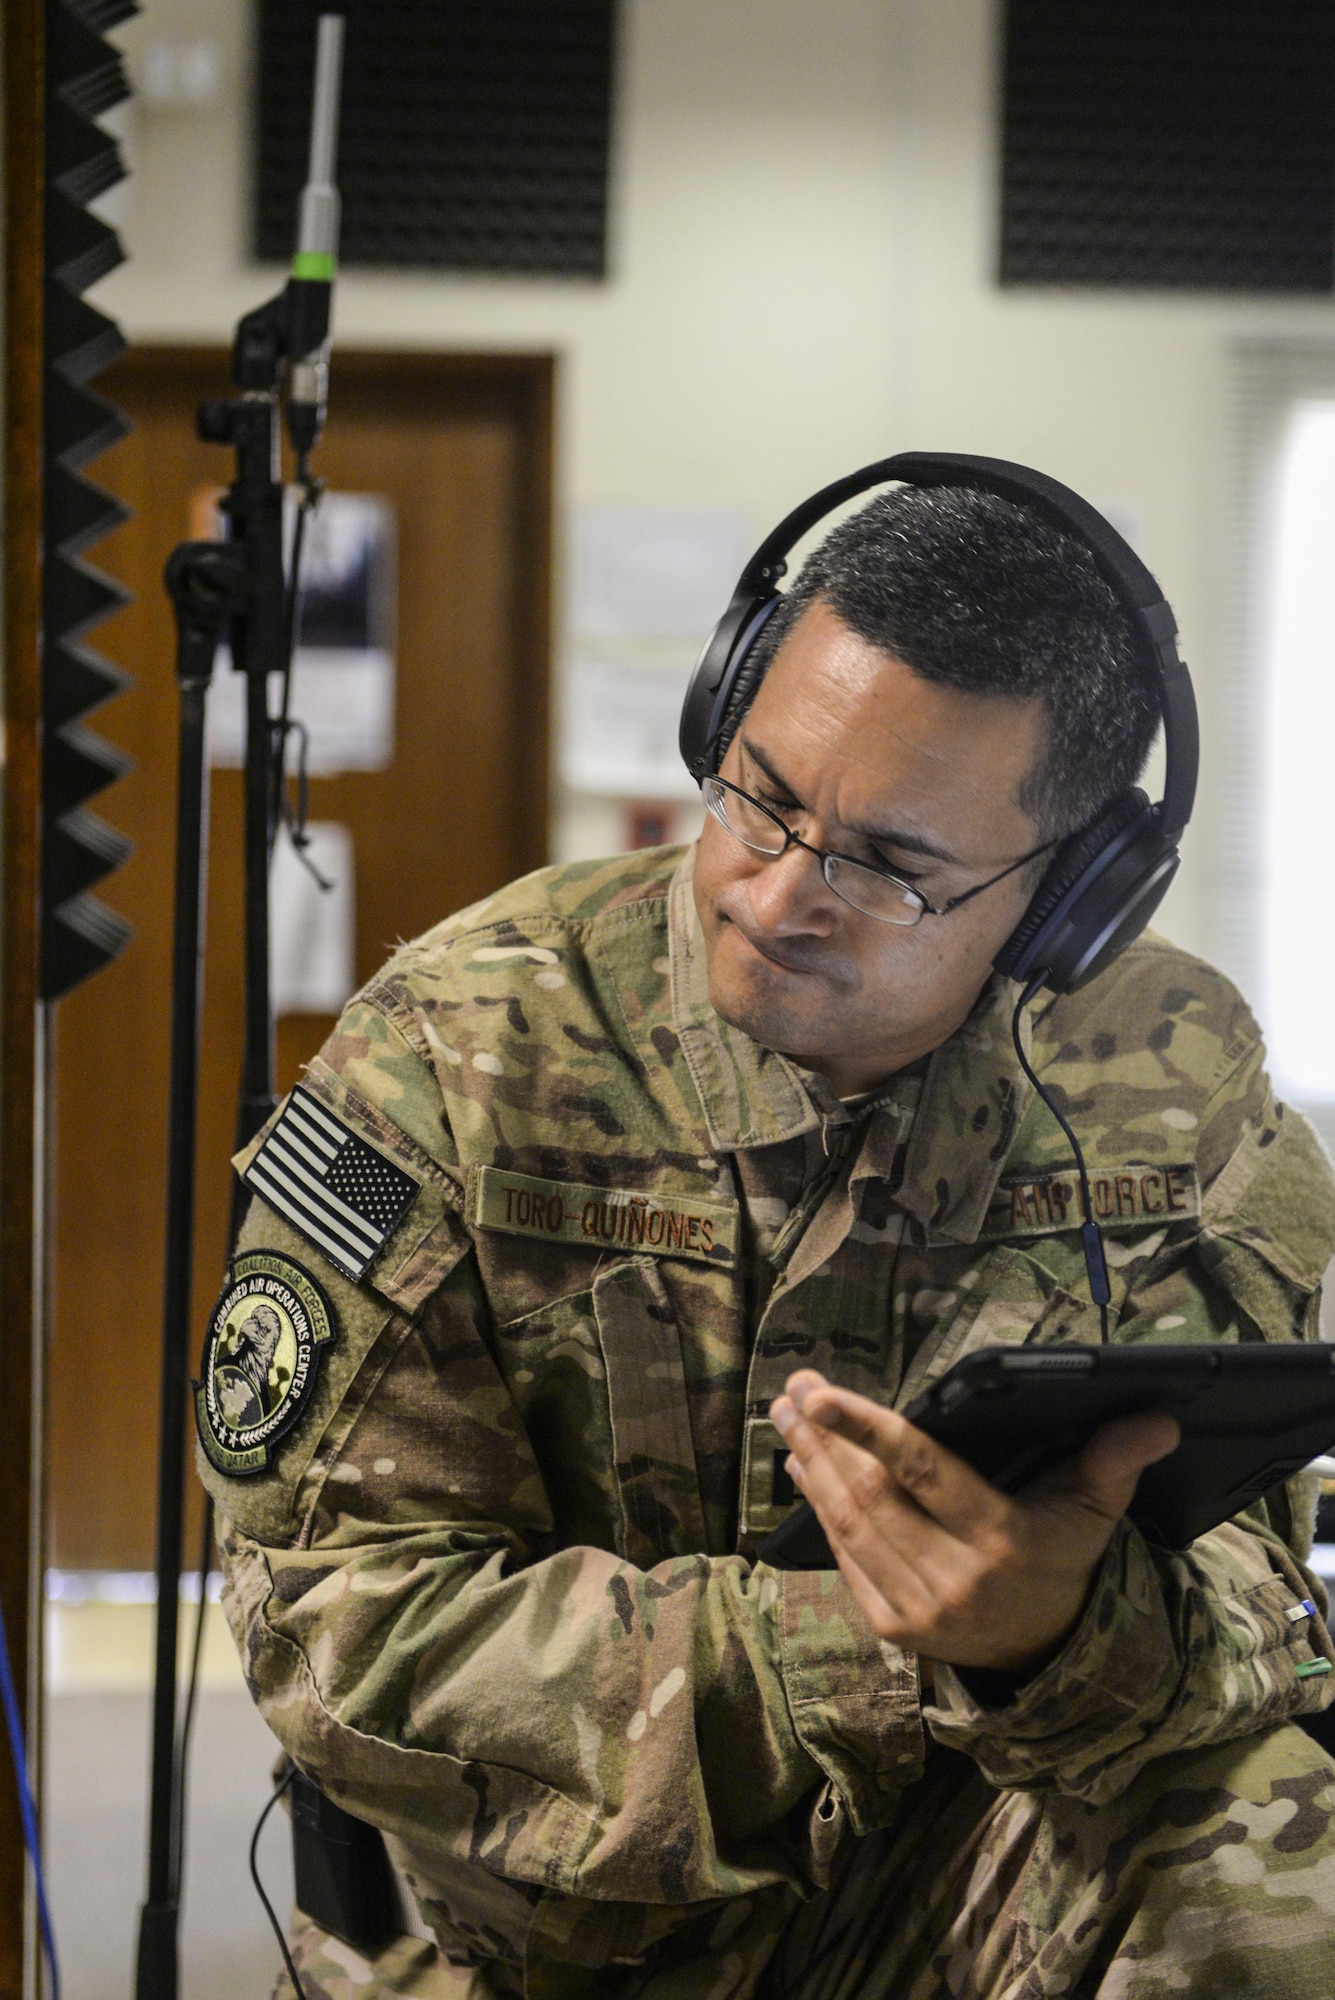 U.S. Air Force Capt. Rafael Toro-Quinones, officer in charge assigned to the Air Force Central Command Band, Touch-n-Go, listens to the band during a recording session where the band recorded their punk rock rendition of the Air Force Song at Al Udeid, Air Force Base, Qatar, Sept. 21, 2017.